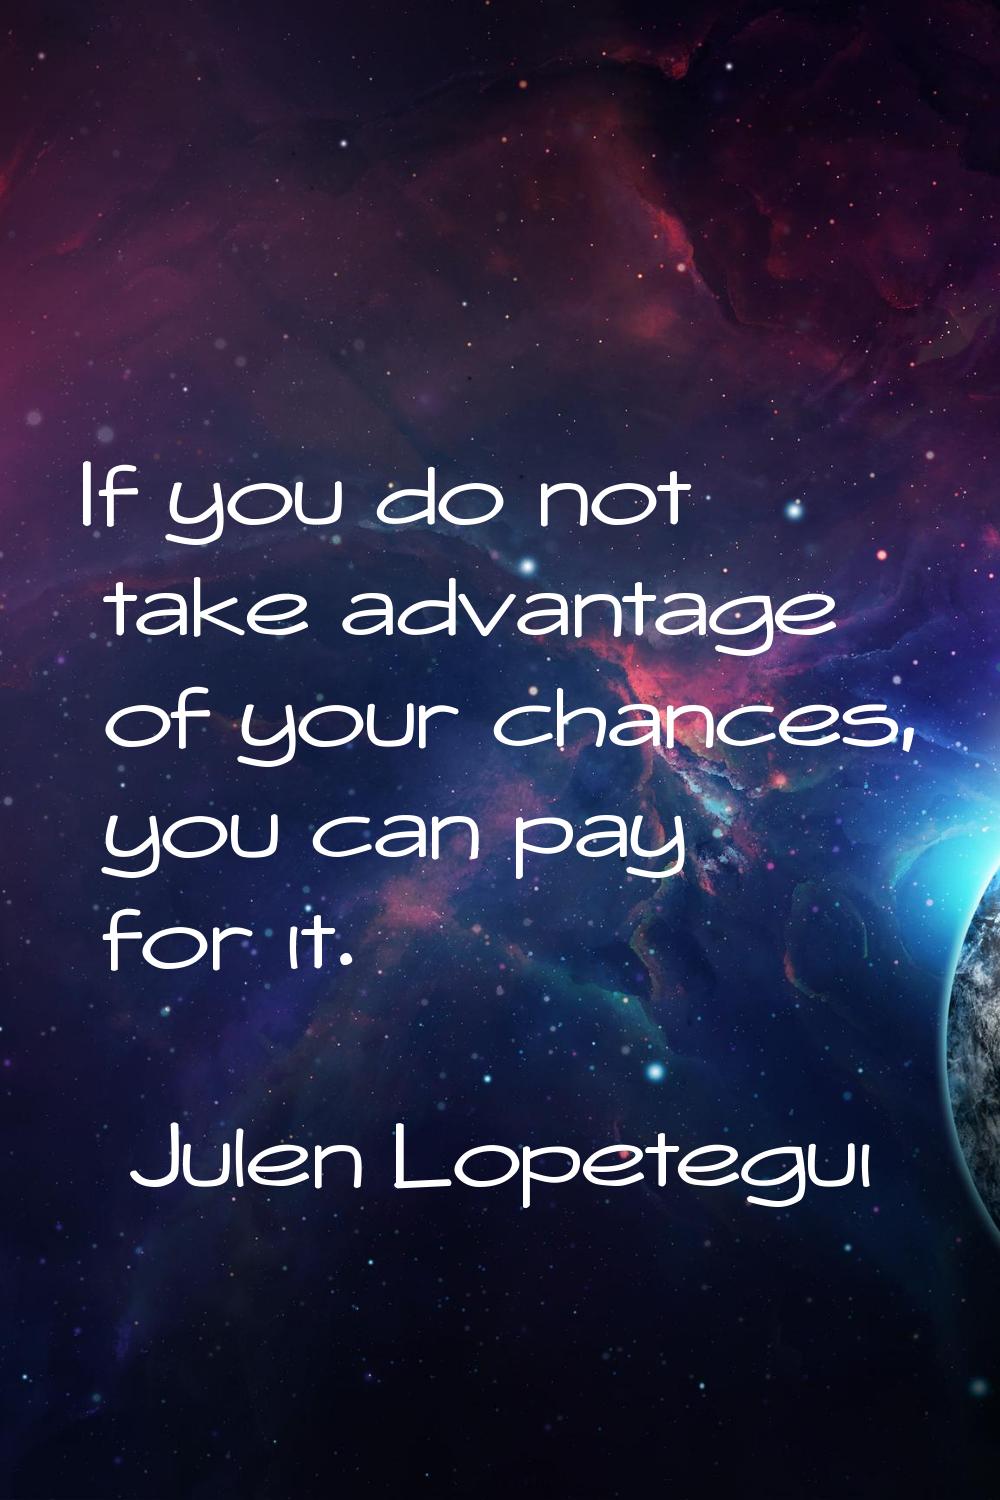 If you do not take advantage of your chances, you can pay for it.